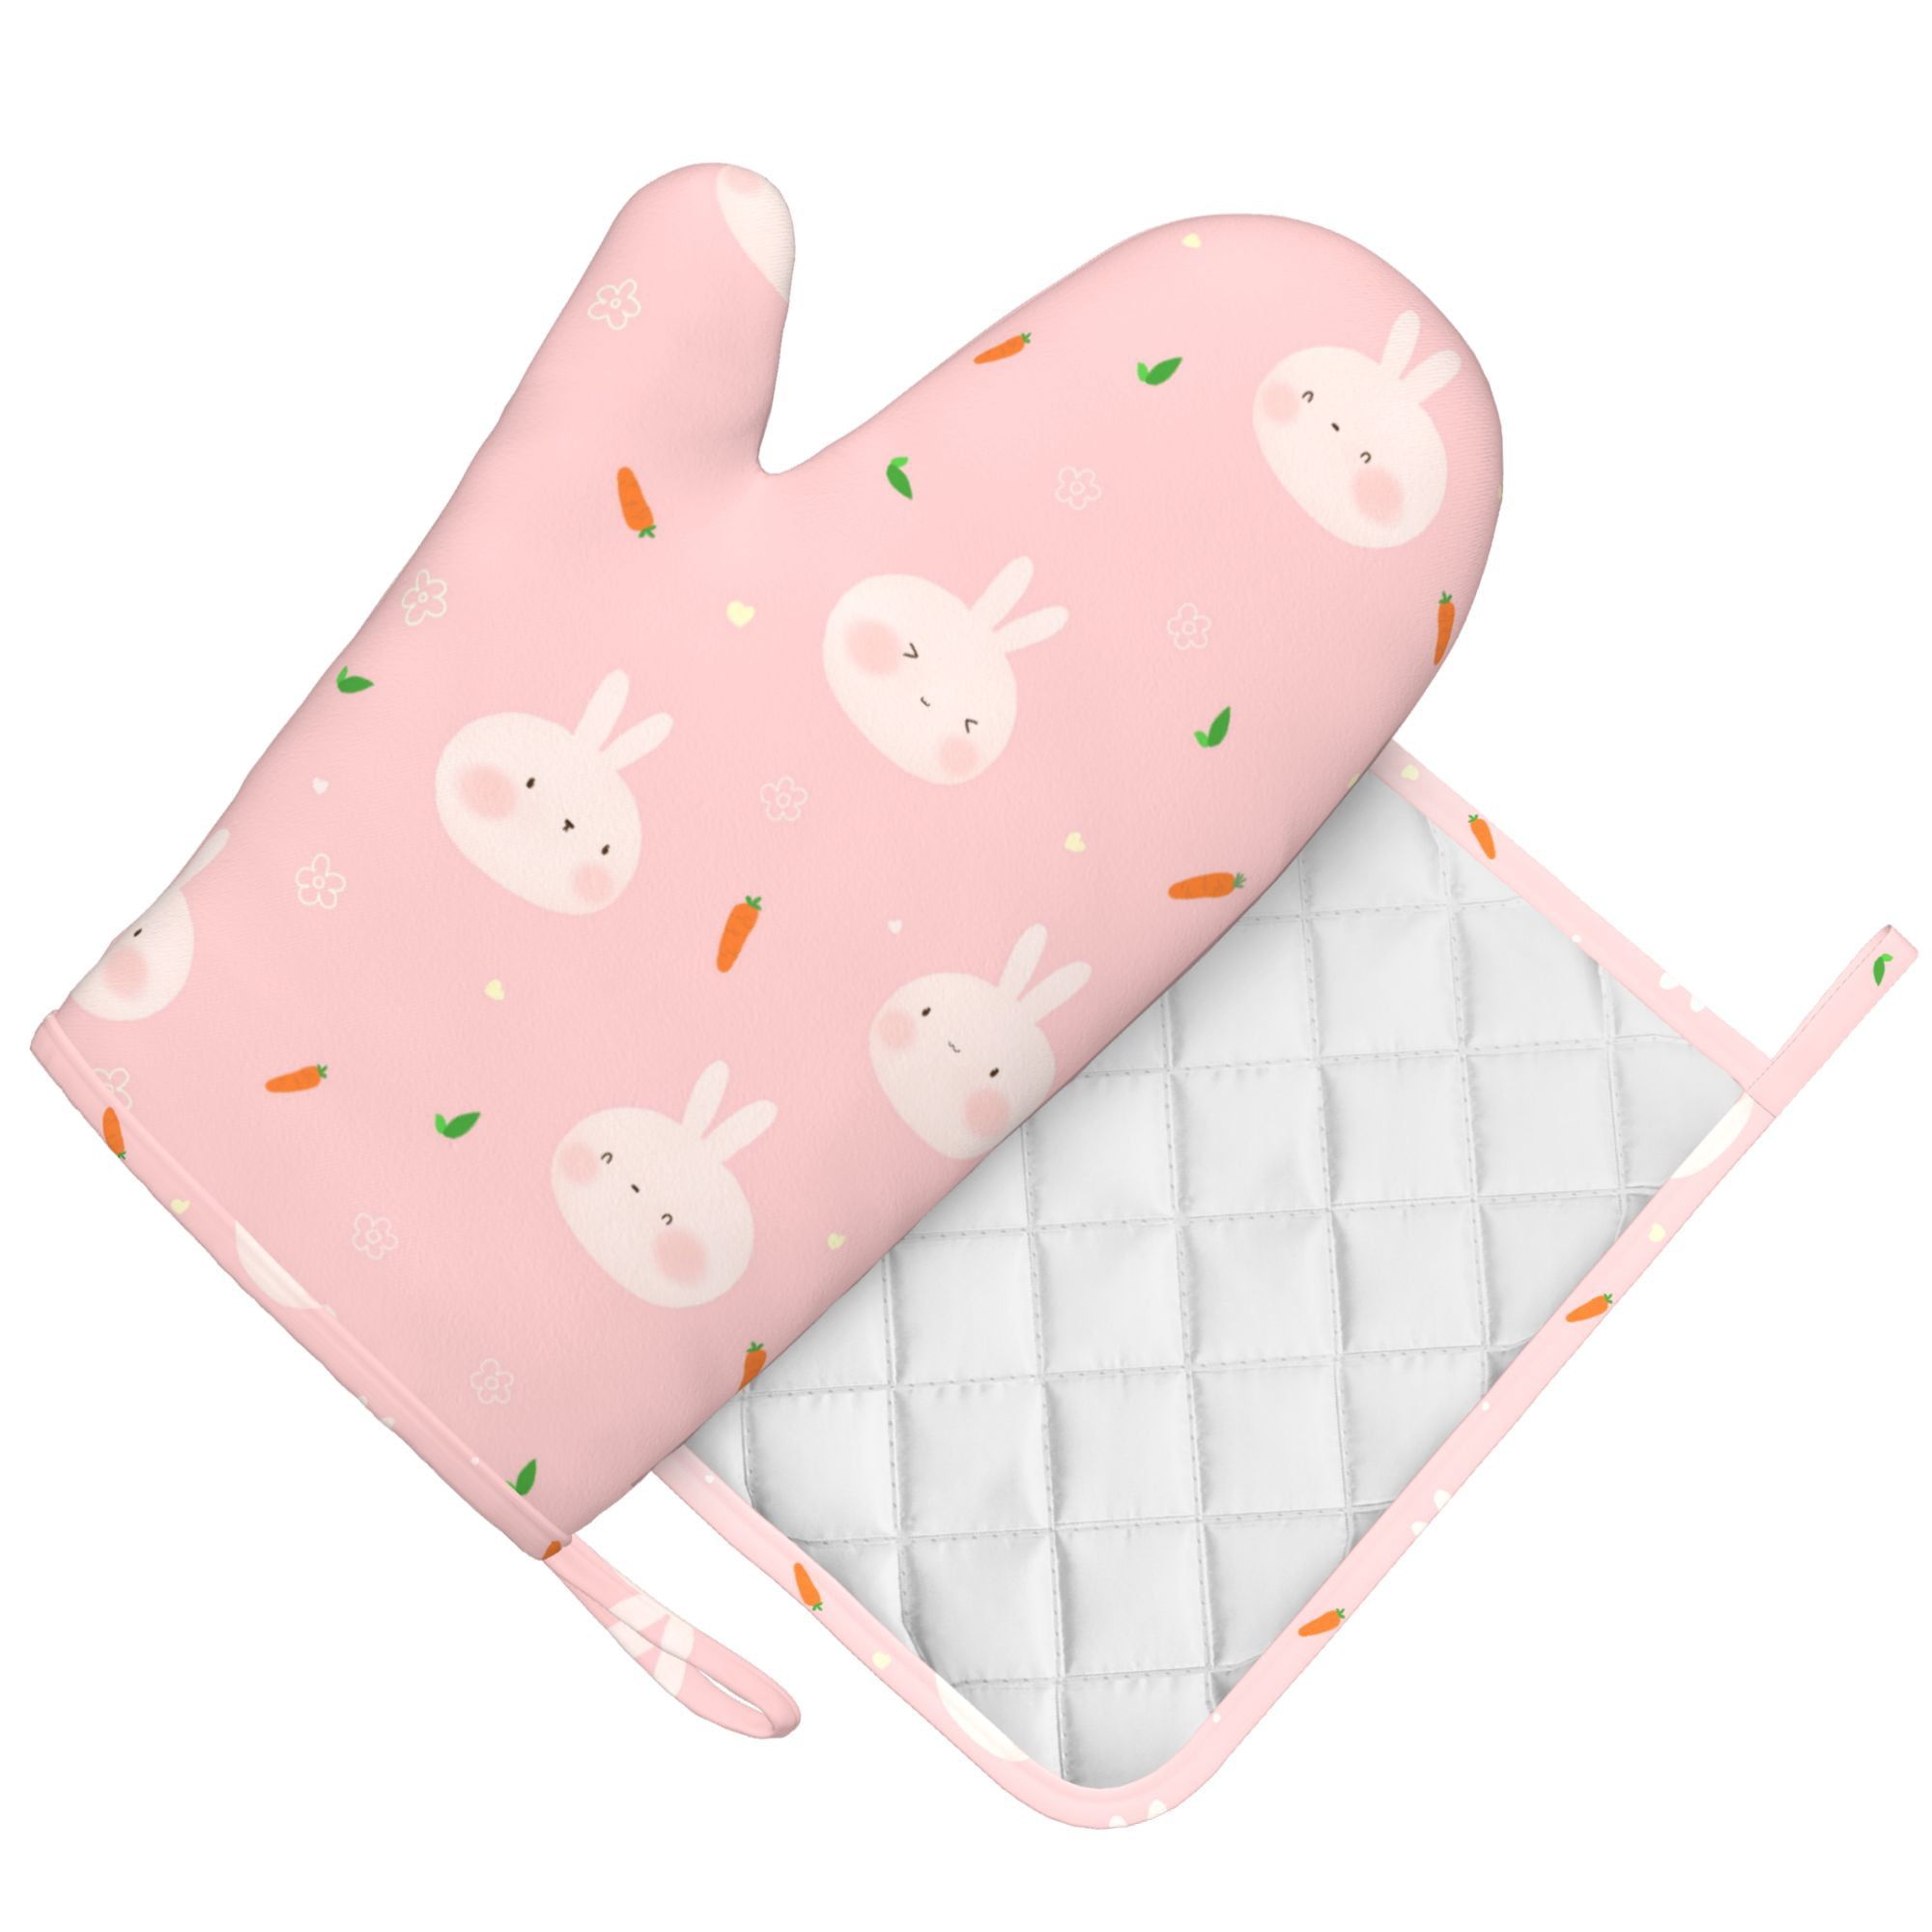 Jinmuzao Butterfly Pattern Holiday Cooking Gear Oven Mitts for Cooking Cute Pot Holders,Oven Mitts and Pot Holders Sets Soft Cotton Lining,Waterproof